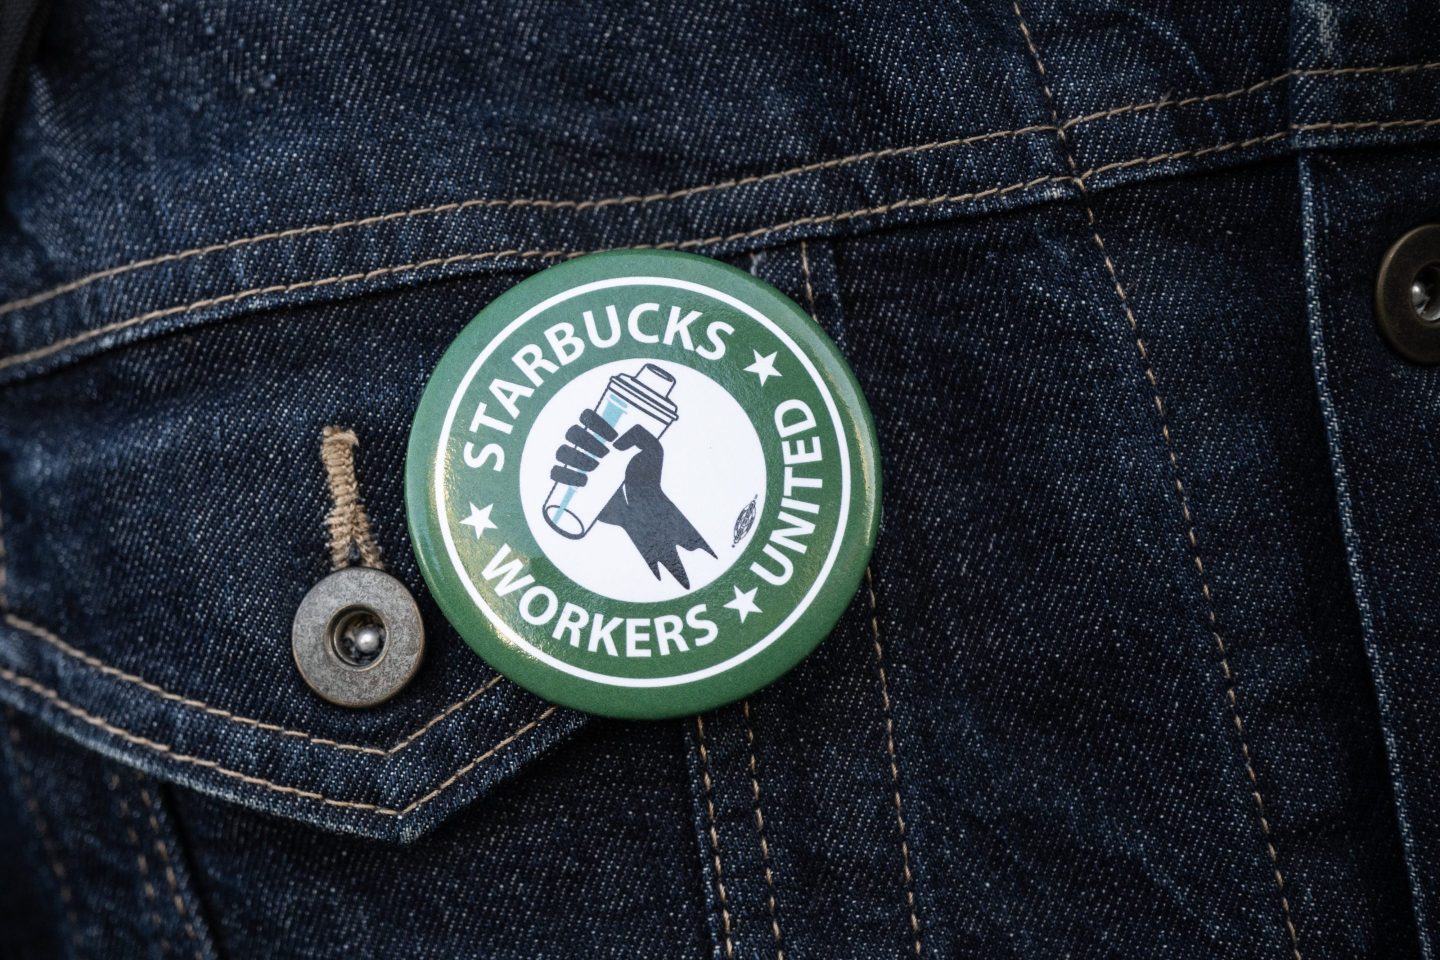 A pin showing the Starbucks Workers United union logo